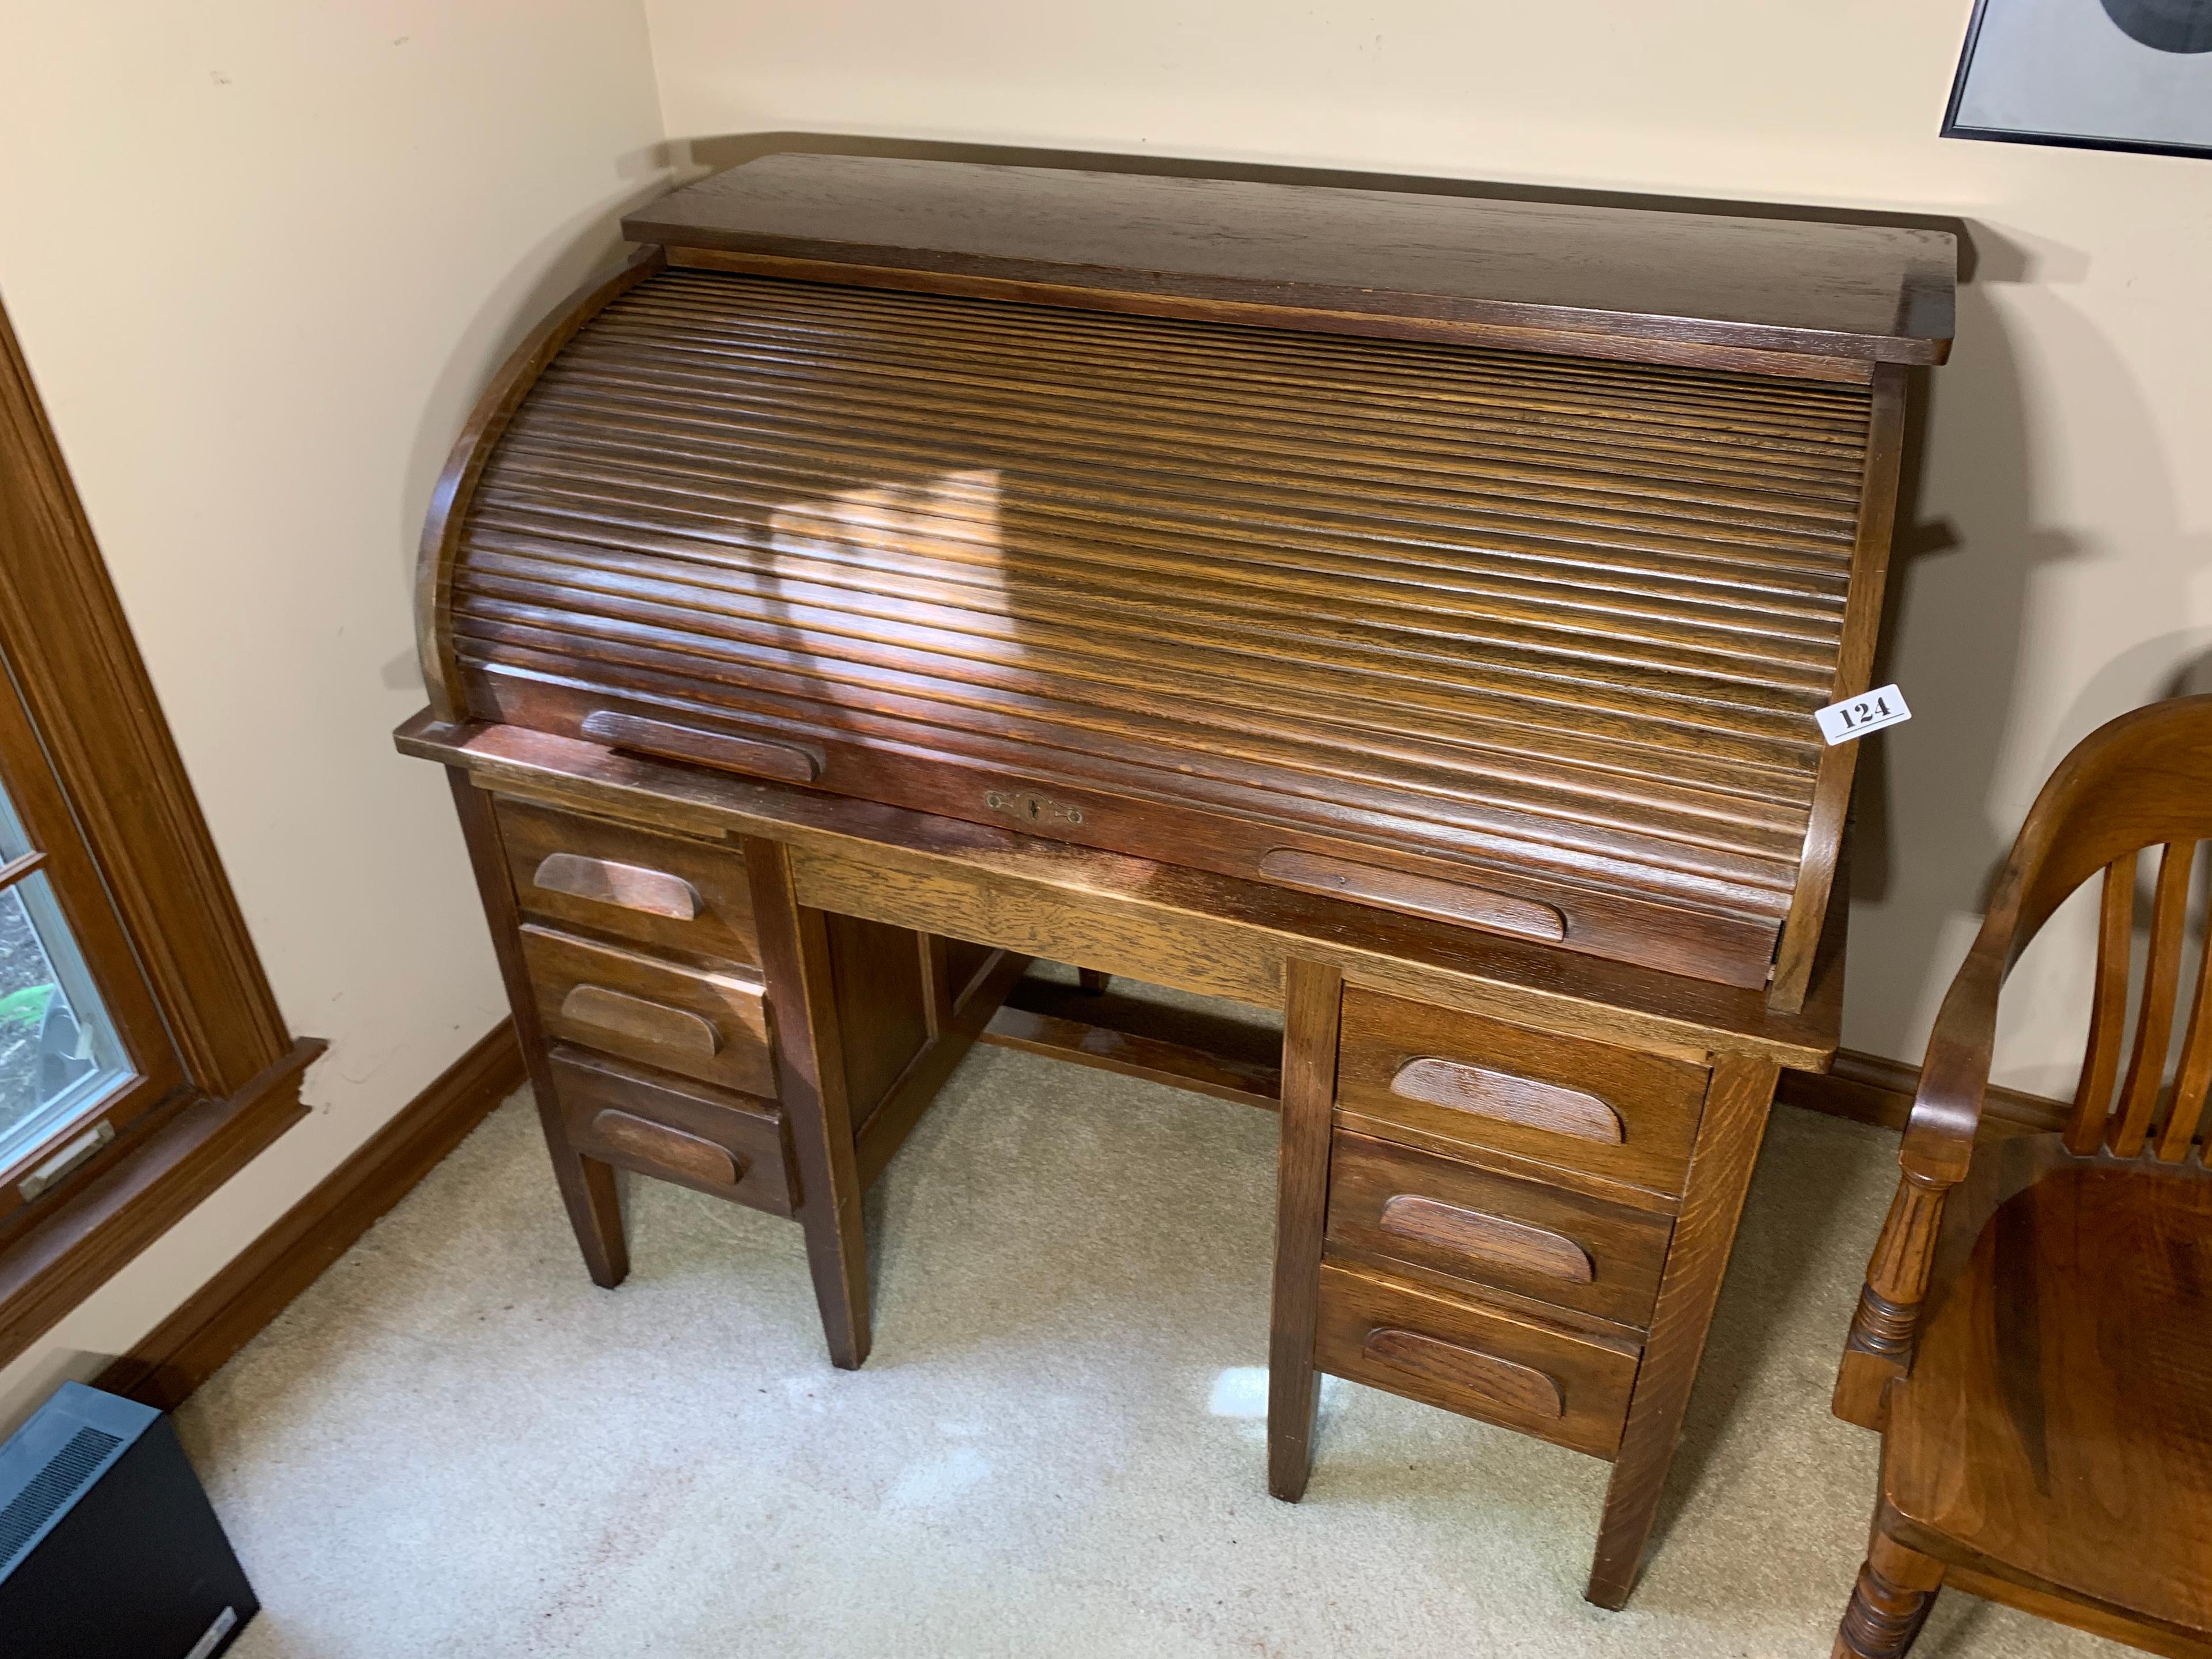 Vintage roll top desk and chair